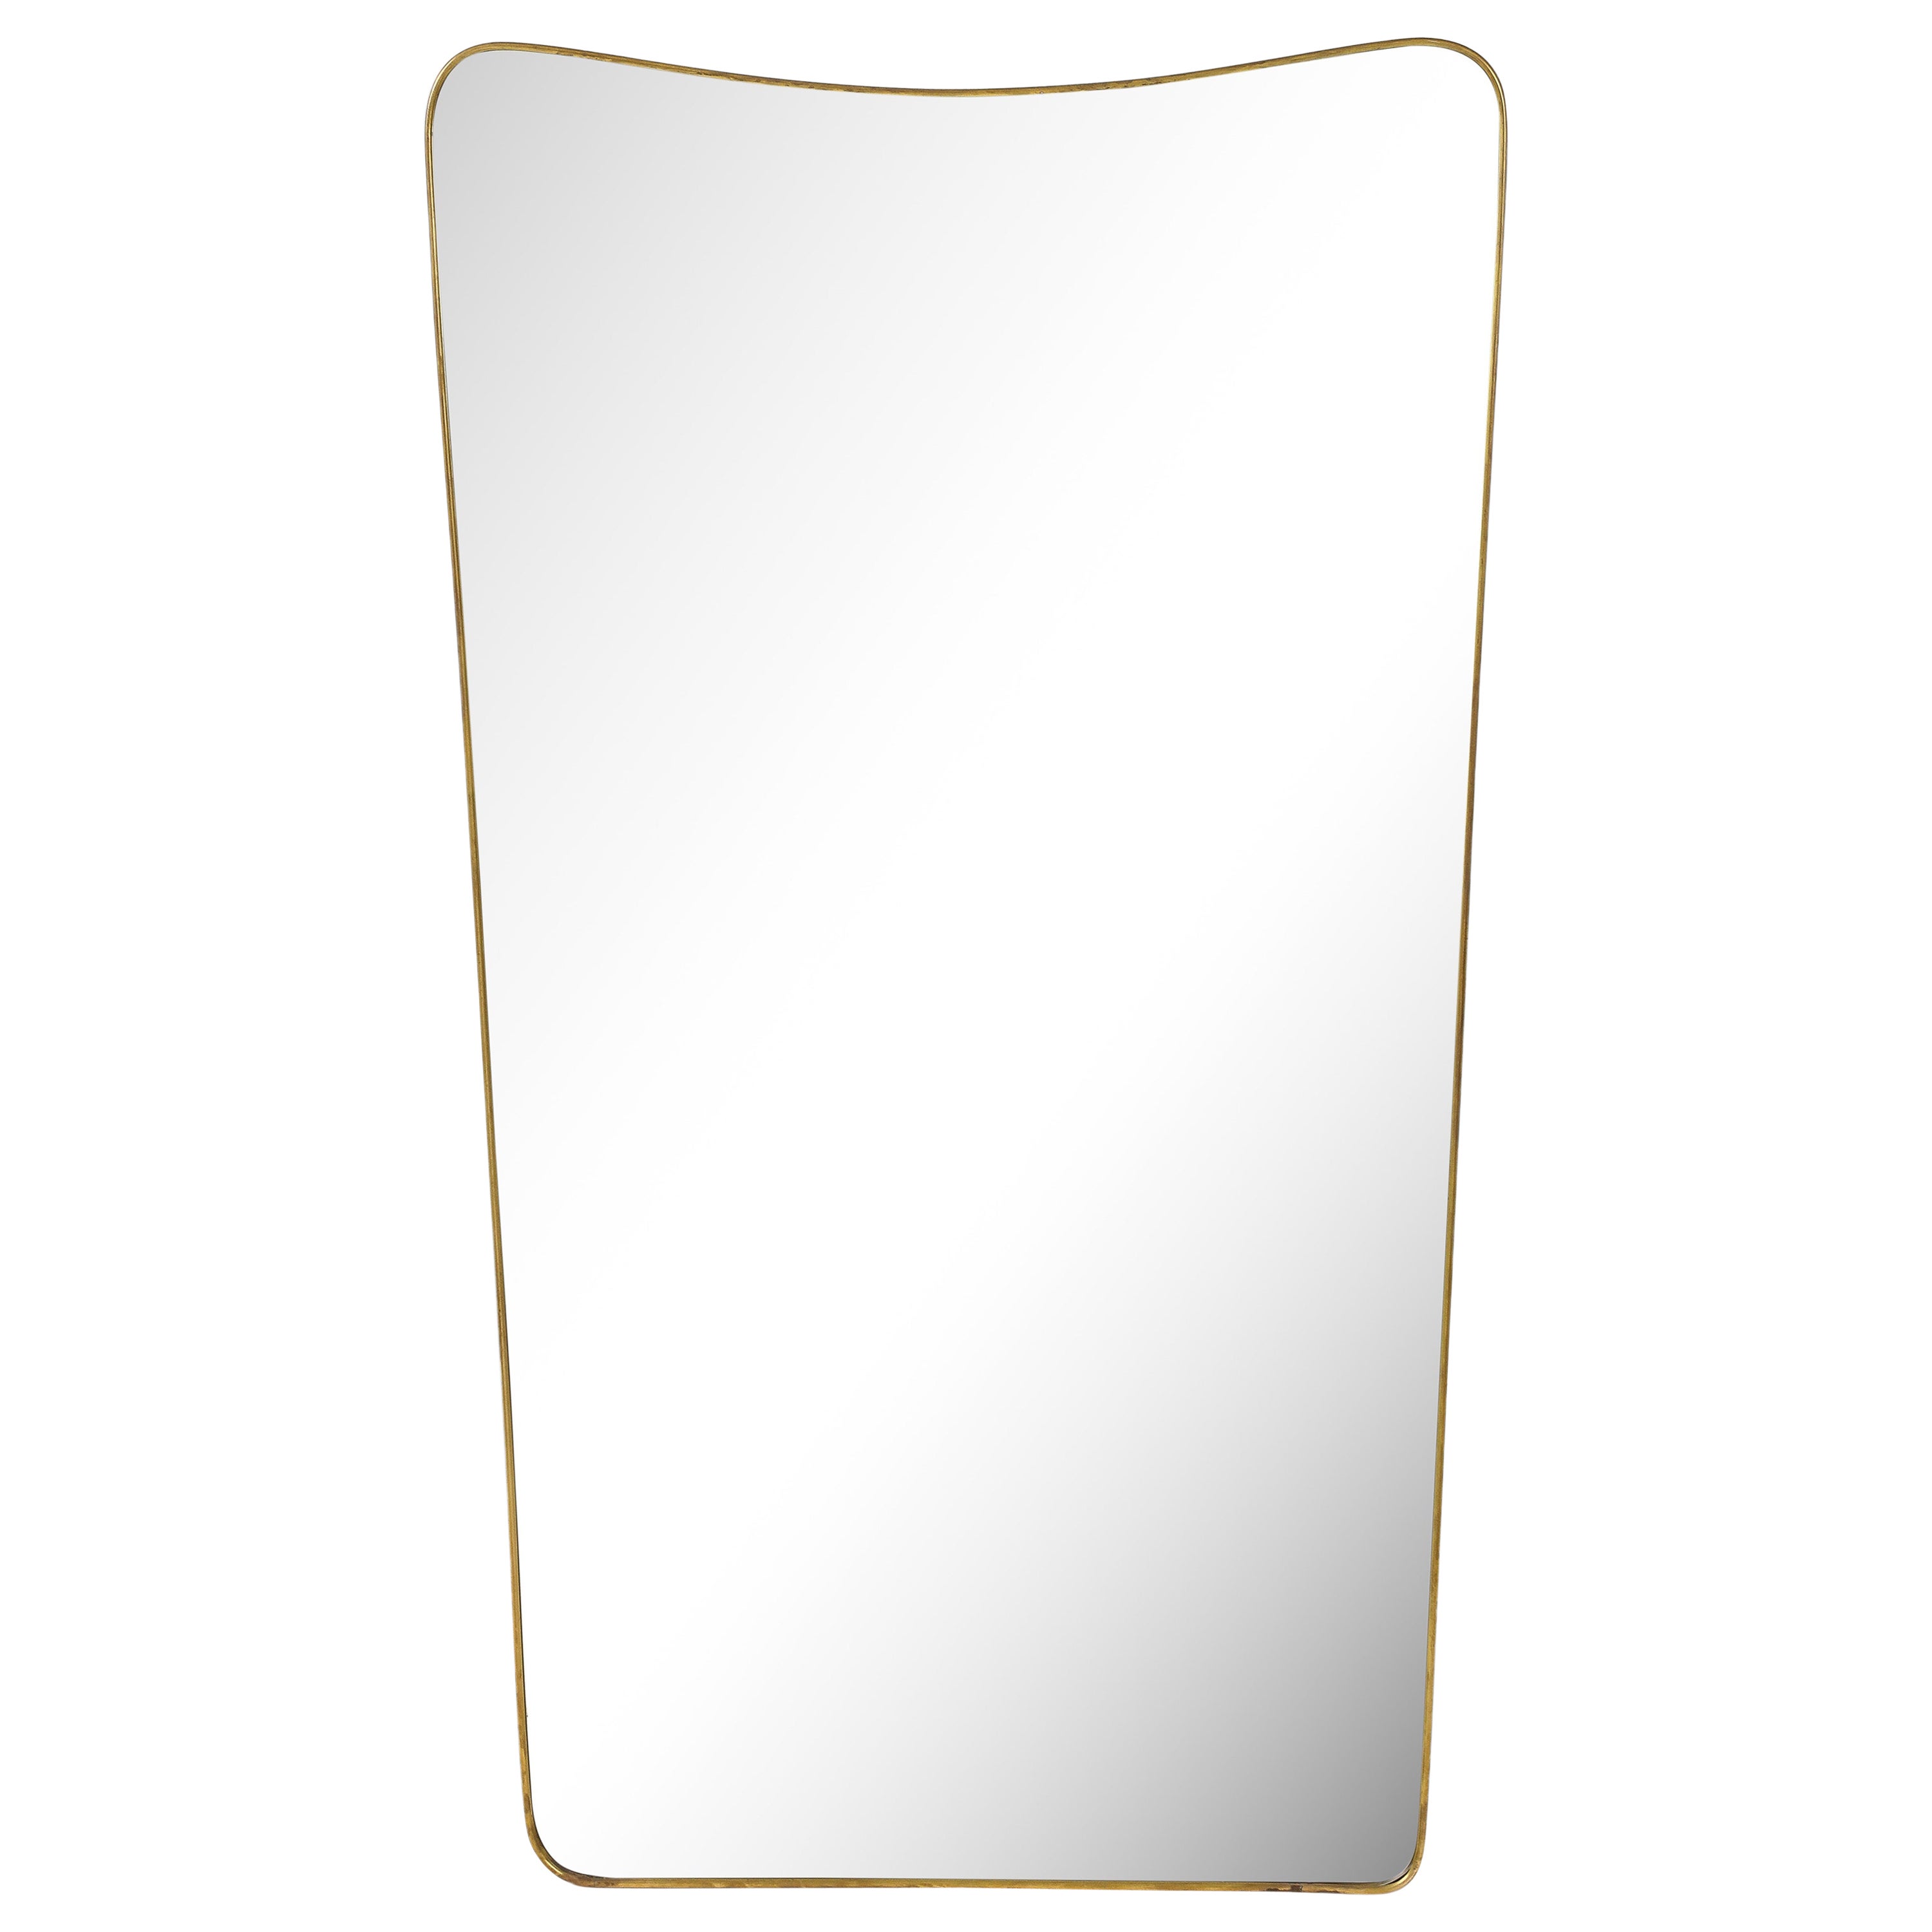 1950s Italian Modernist Grand Scale Shaped Brass Wall Mirror For Sale